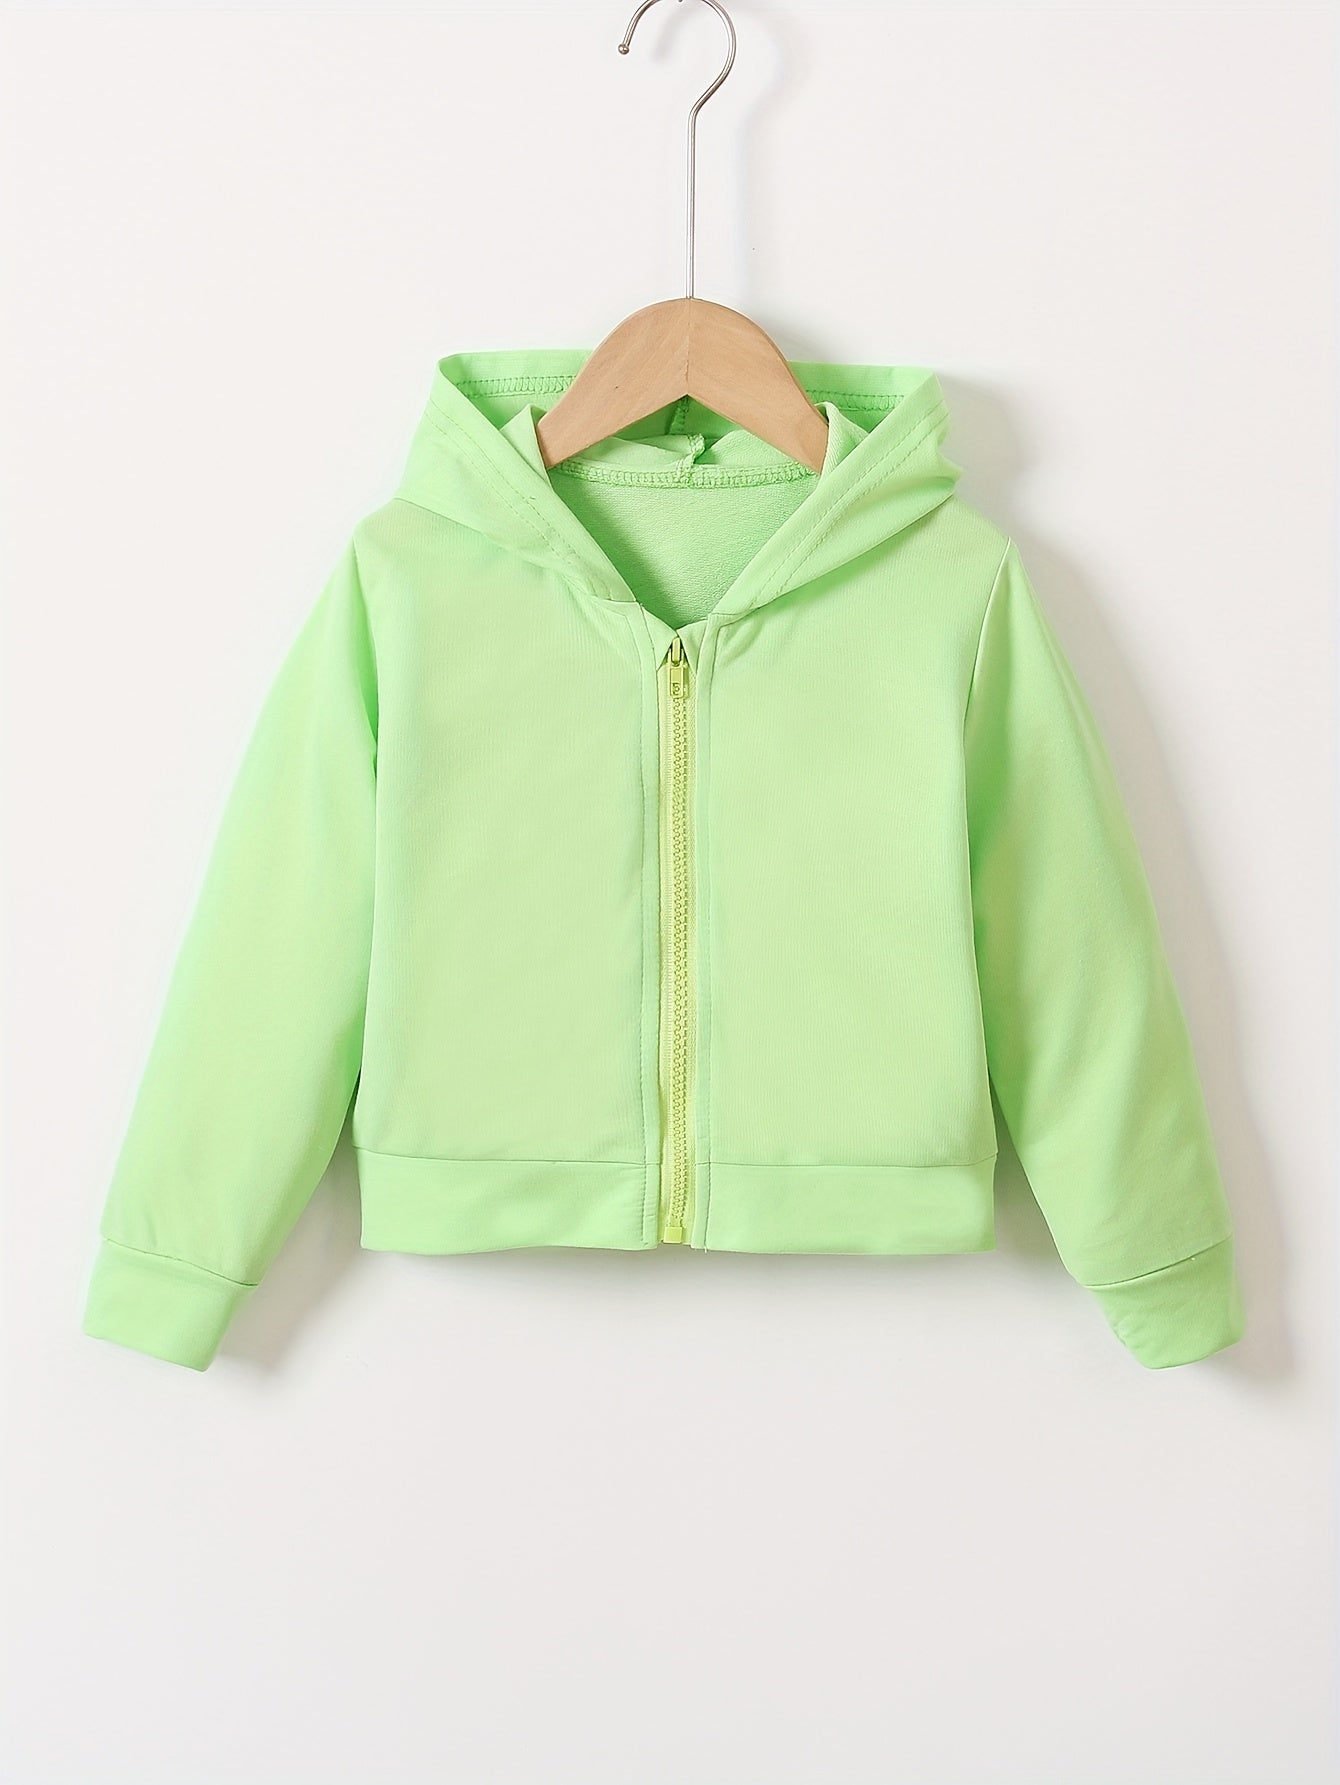 Girls Plain Color Hooded Jacket Zipper Casual Long Sleeve Cardigan For Kids 4-7 Years Old